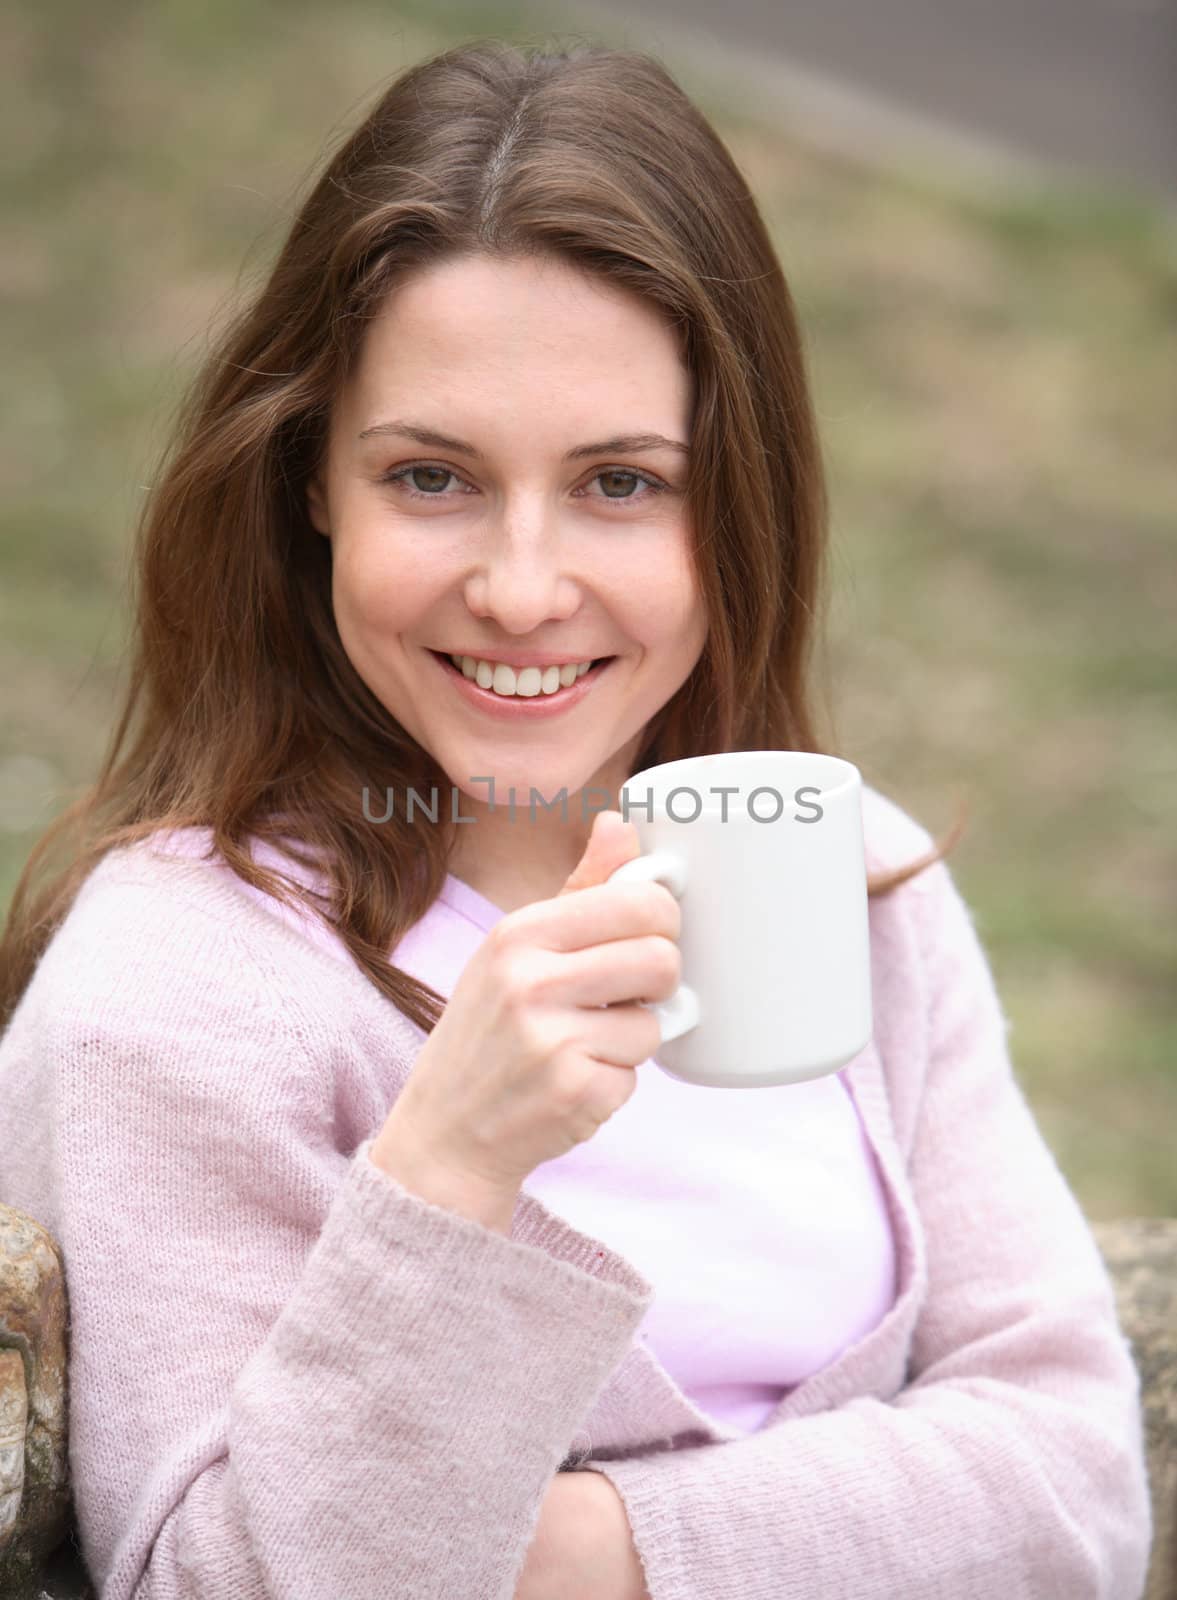 The girl holds a cup in hands and smiles